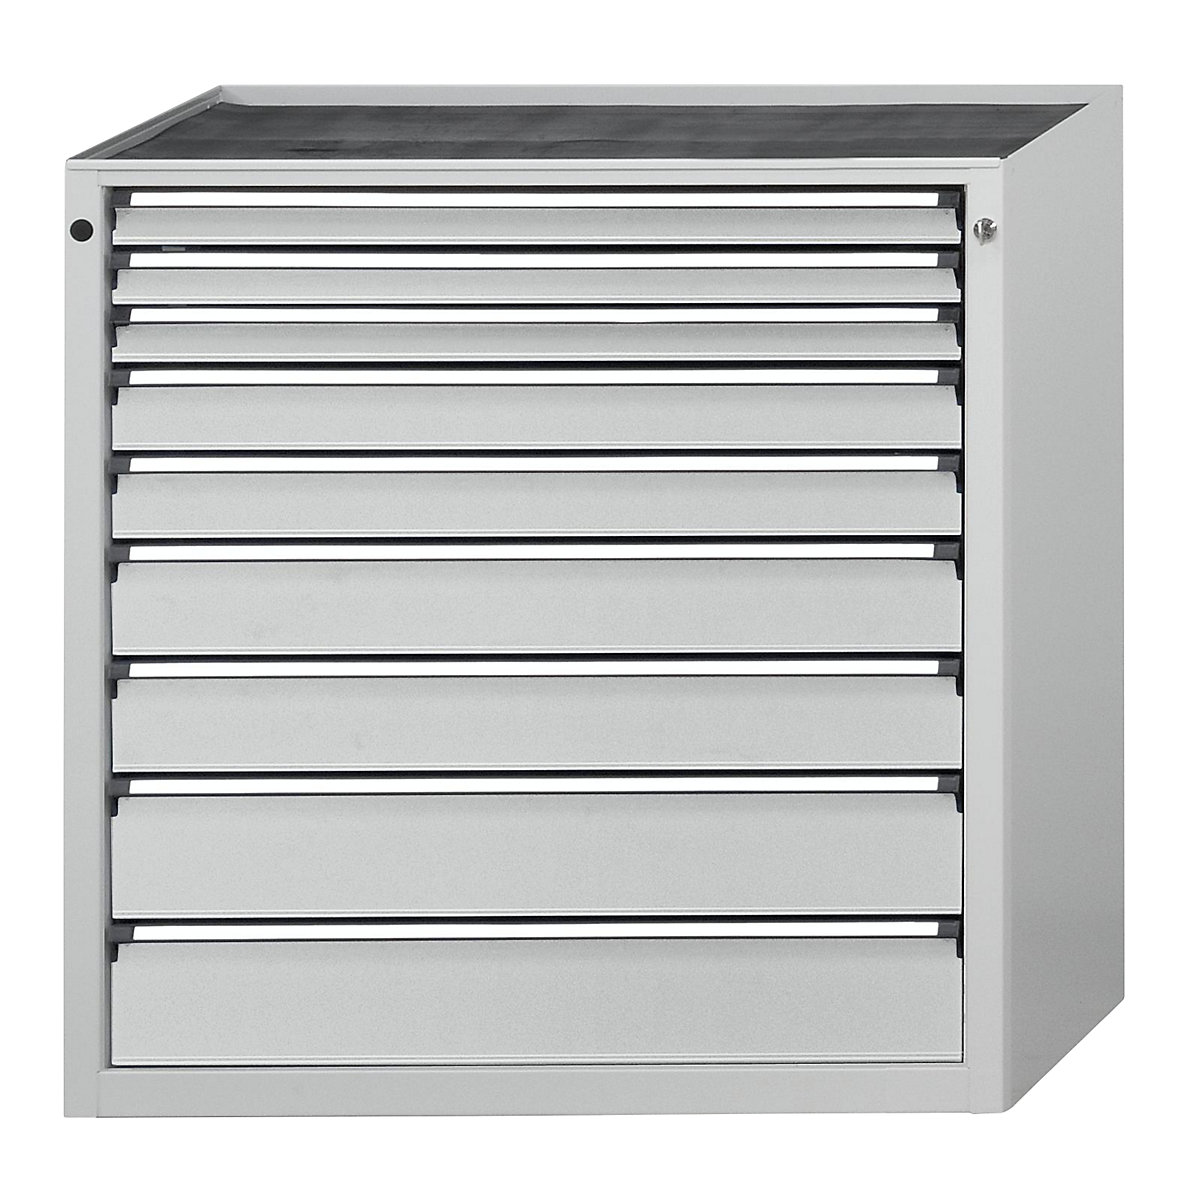 Drawer cupboard – ANKE, WxD 910 x 675 mm, 9 drawers, height 980 mm, front in light grey-6